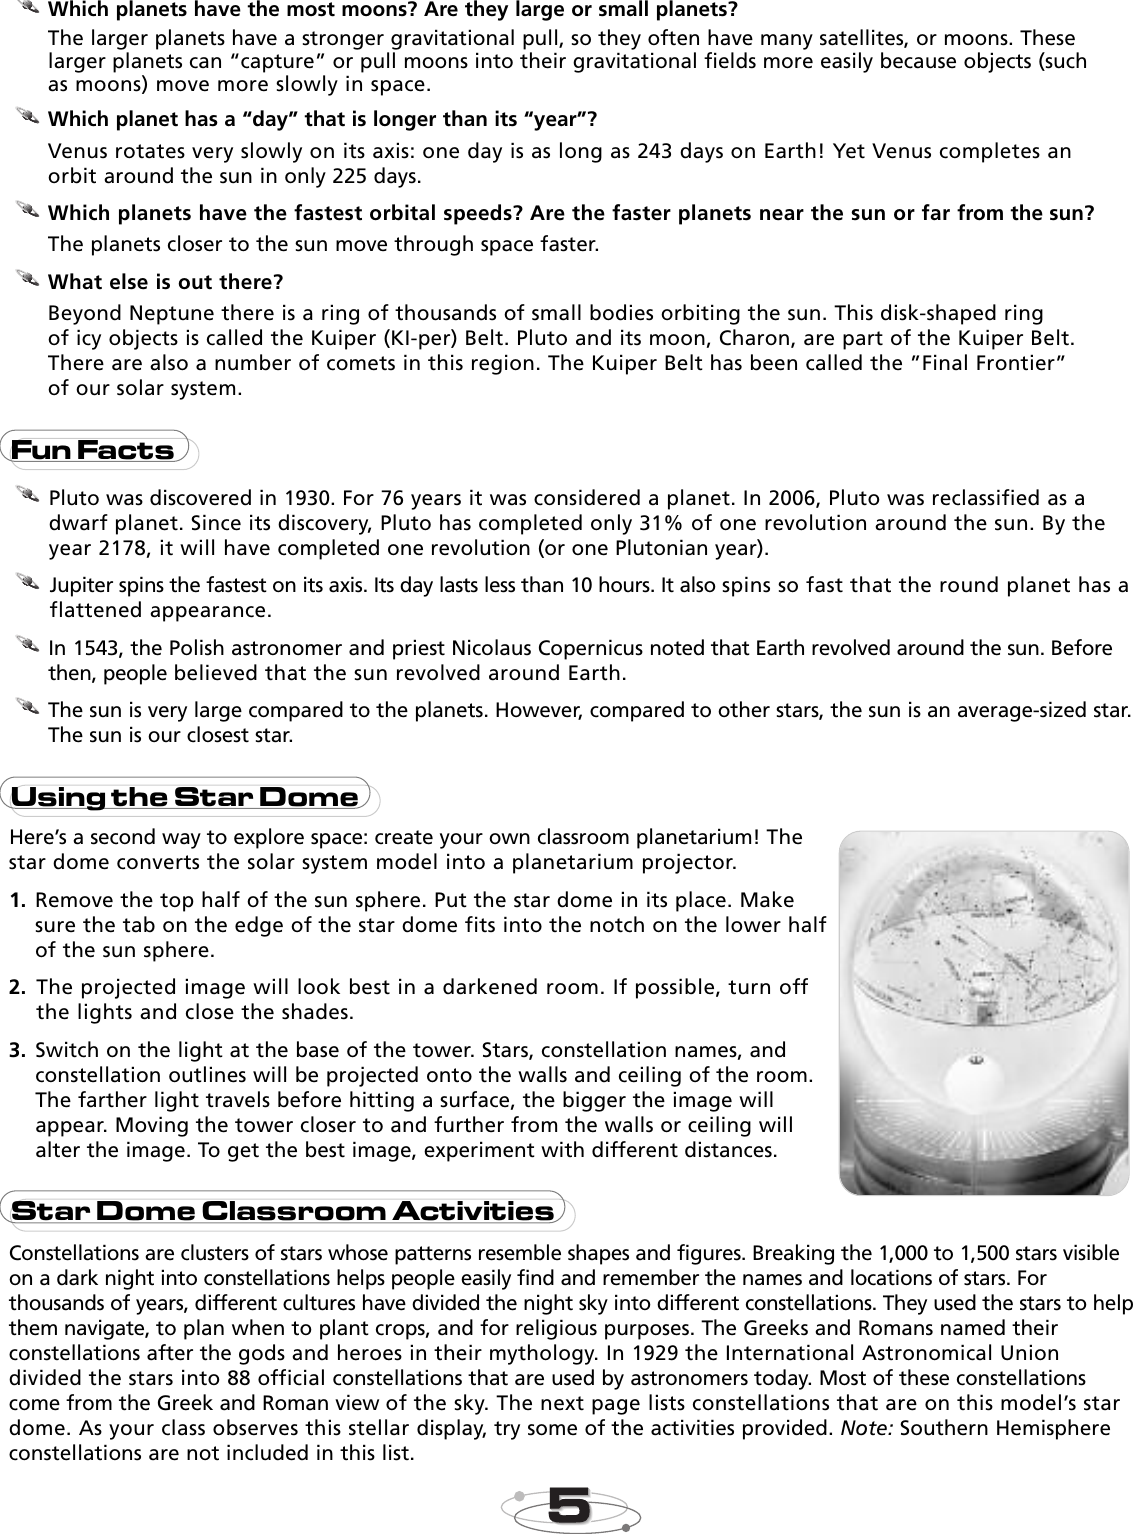 Page 6 of 8 - Educational-Insights Educational-Insights-Educational-Insights-Telescope-Ei-5237-Users-Manual- 5235 MSSysGuideRev2006  Educational-insights-educational-insights-telescope-ei-5237-users-manual